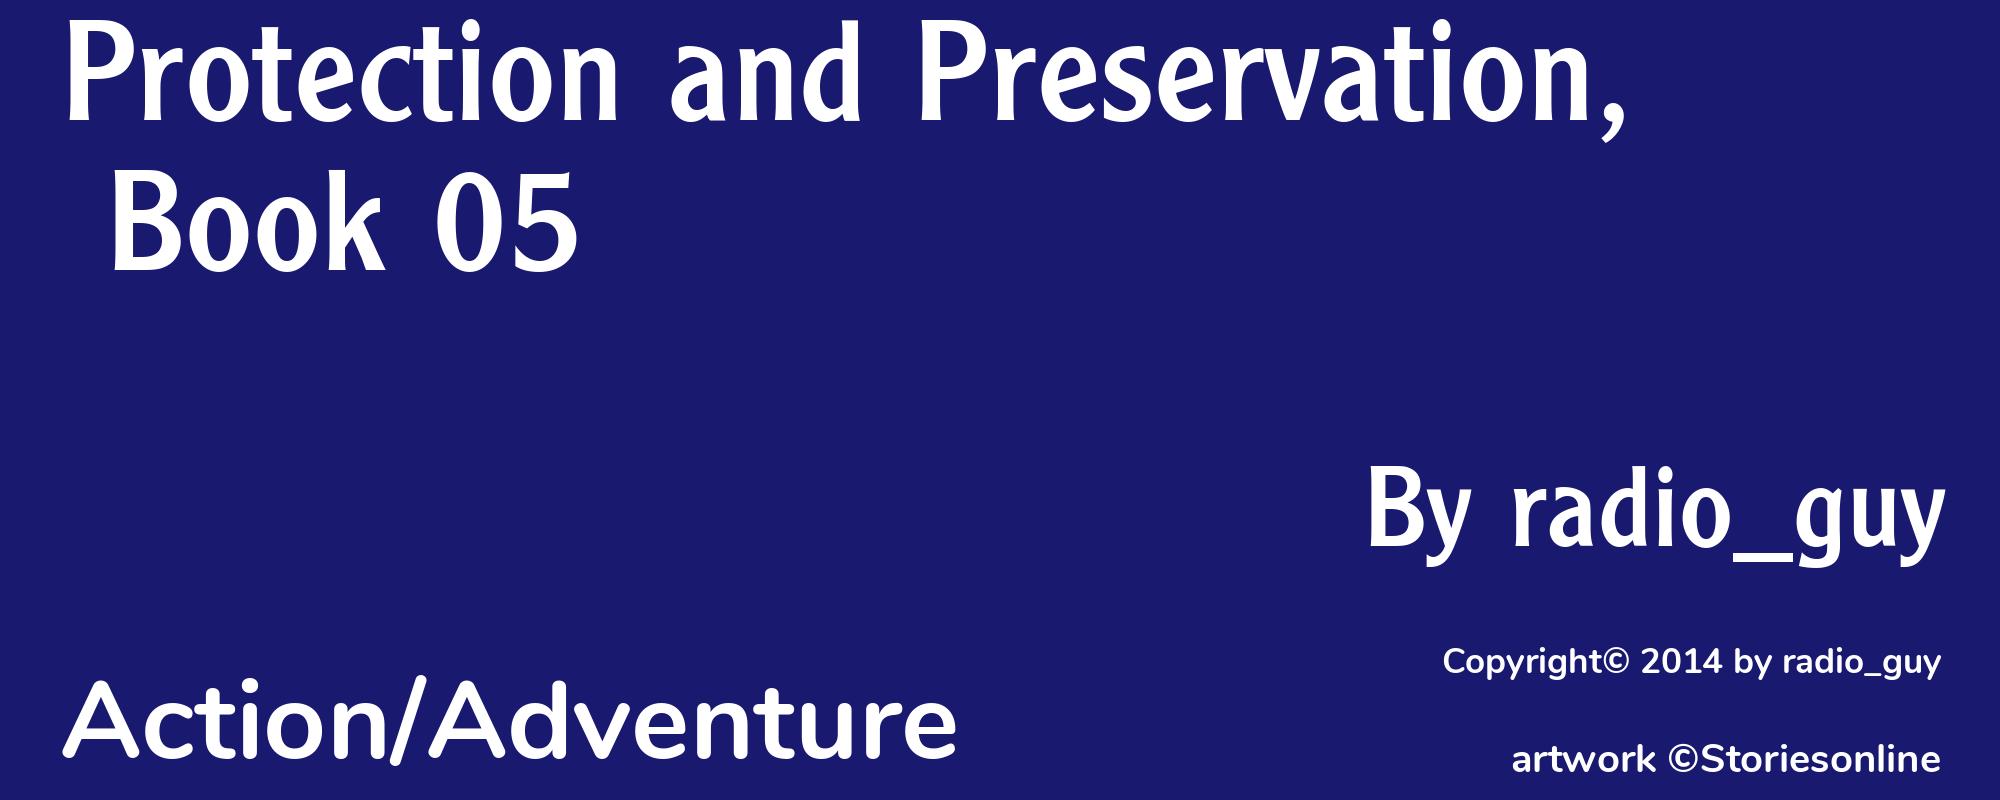 Protection and Preservation, Book 05 - Cover